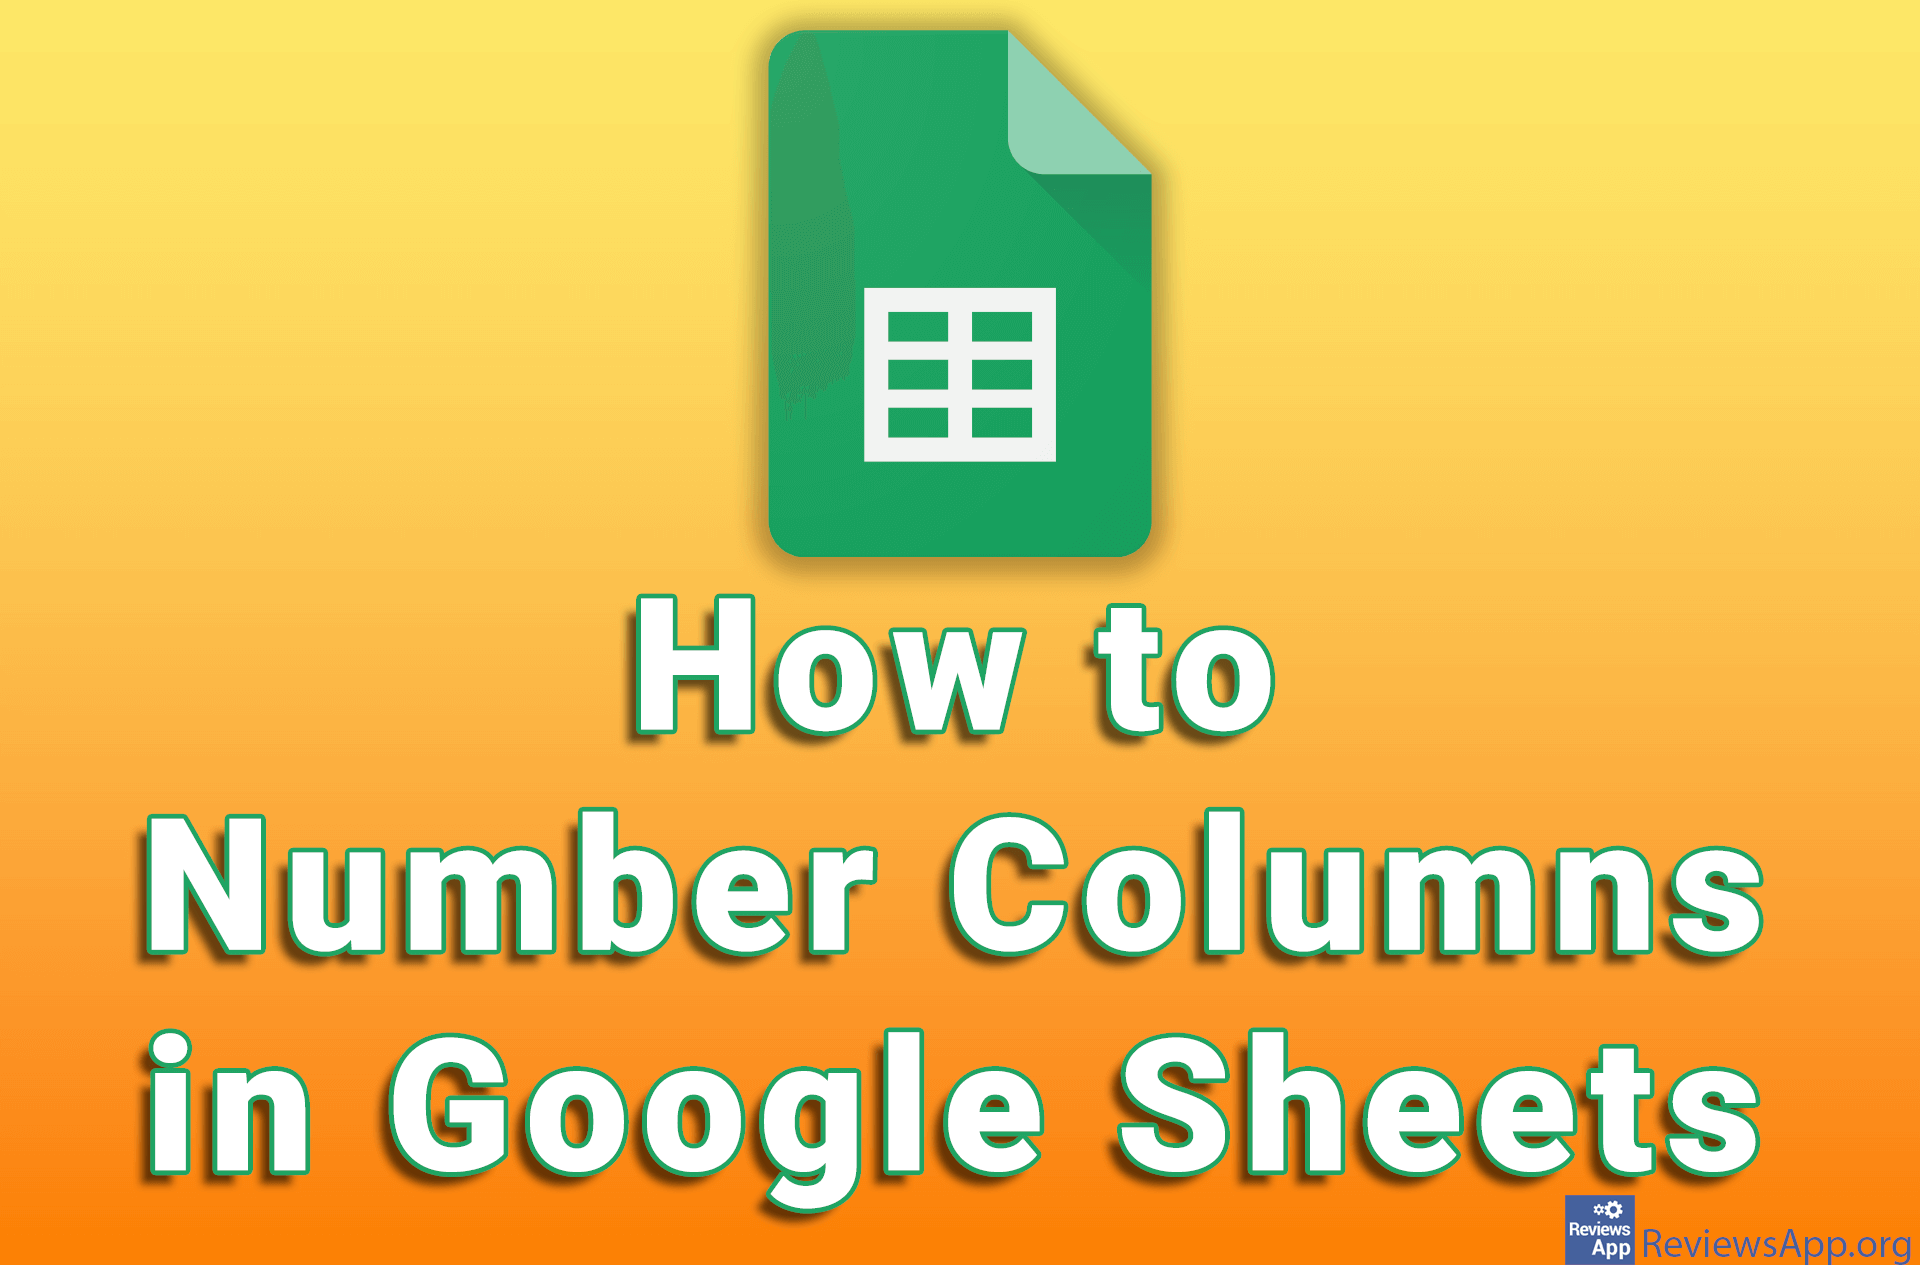 How to Number Columns in Google Sheets